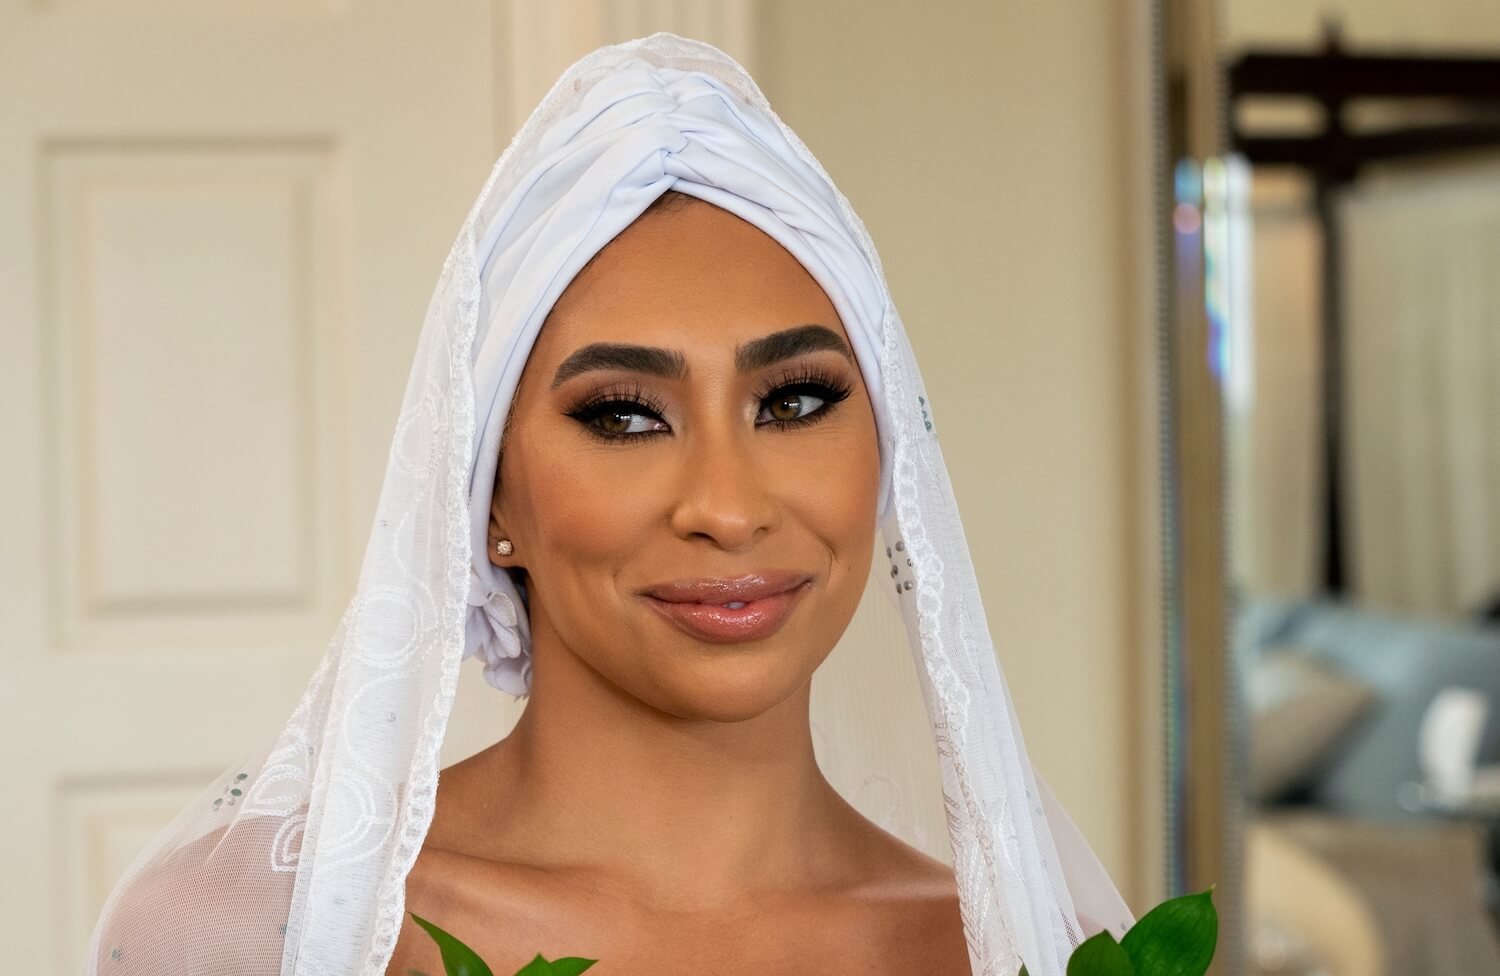 'Love Is Blind' star Raven reveals new details regarding SK's cheating. Raven is seen here in a wedding veil.